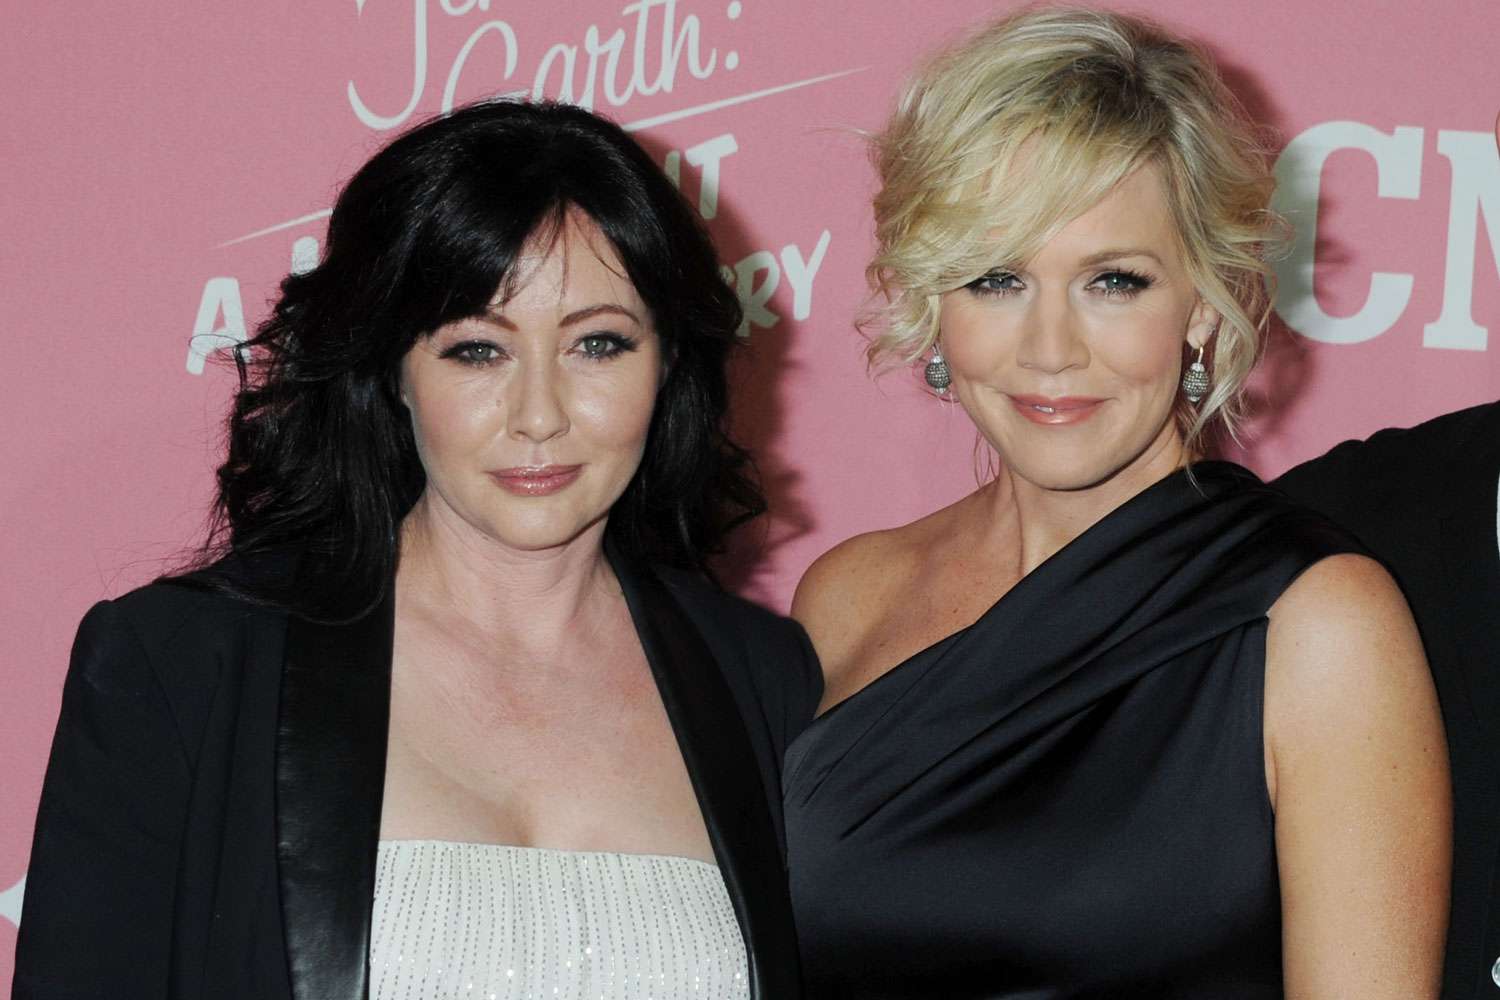 Jennie Garth Shares the Beverly Hills, 90210 Cast Text Chain's Heartbreaking Reaction to Shannen Doherty's Death: 'No More Loss'